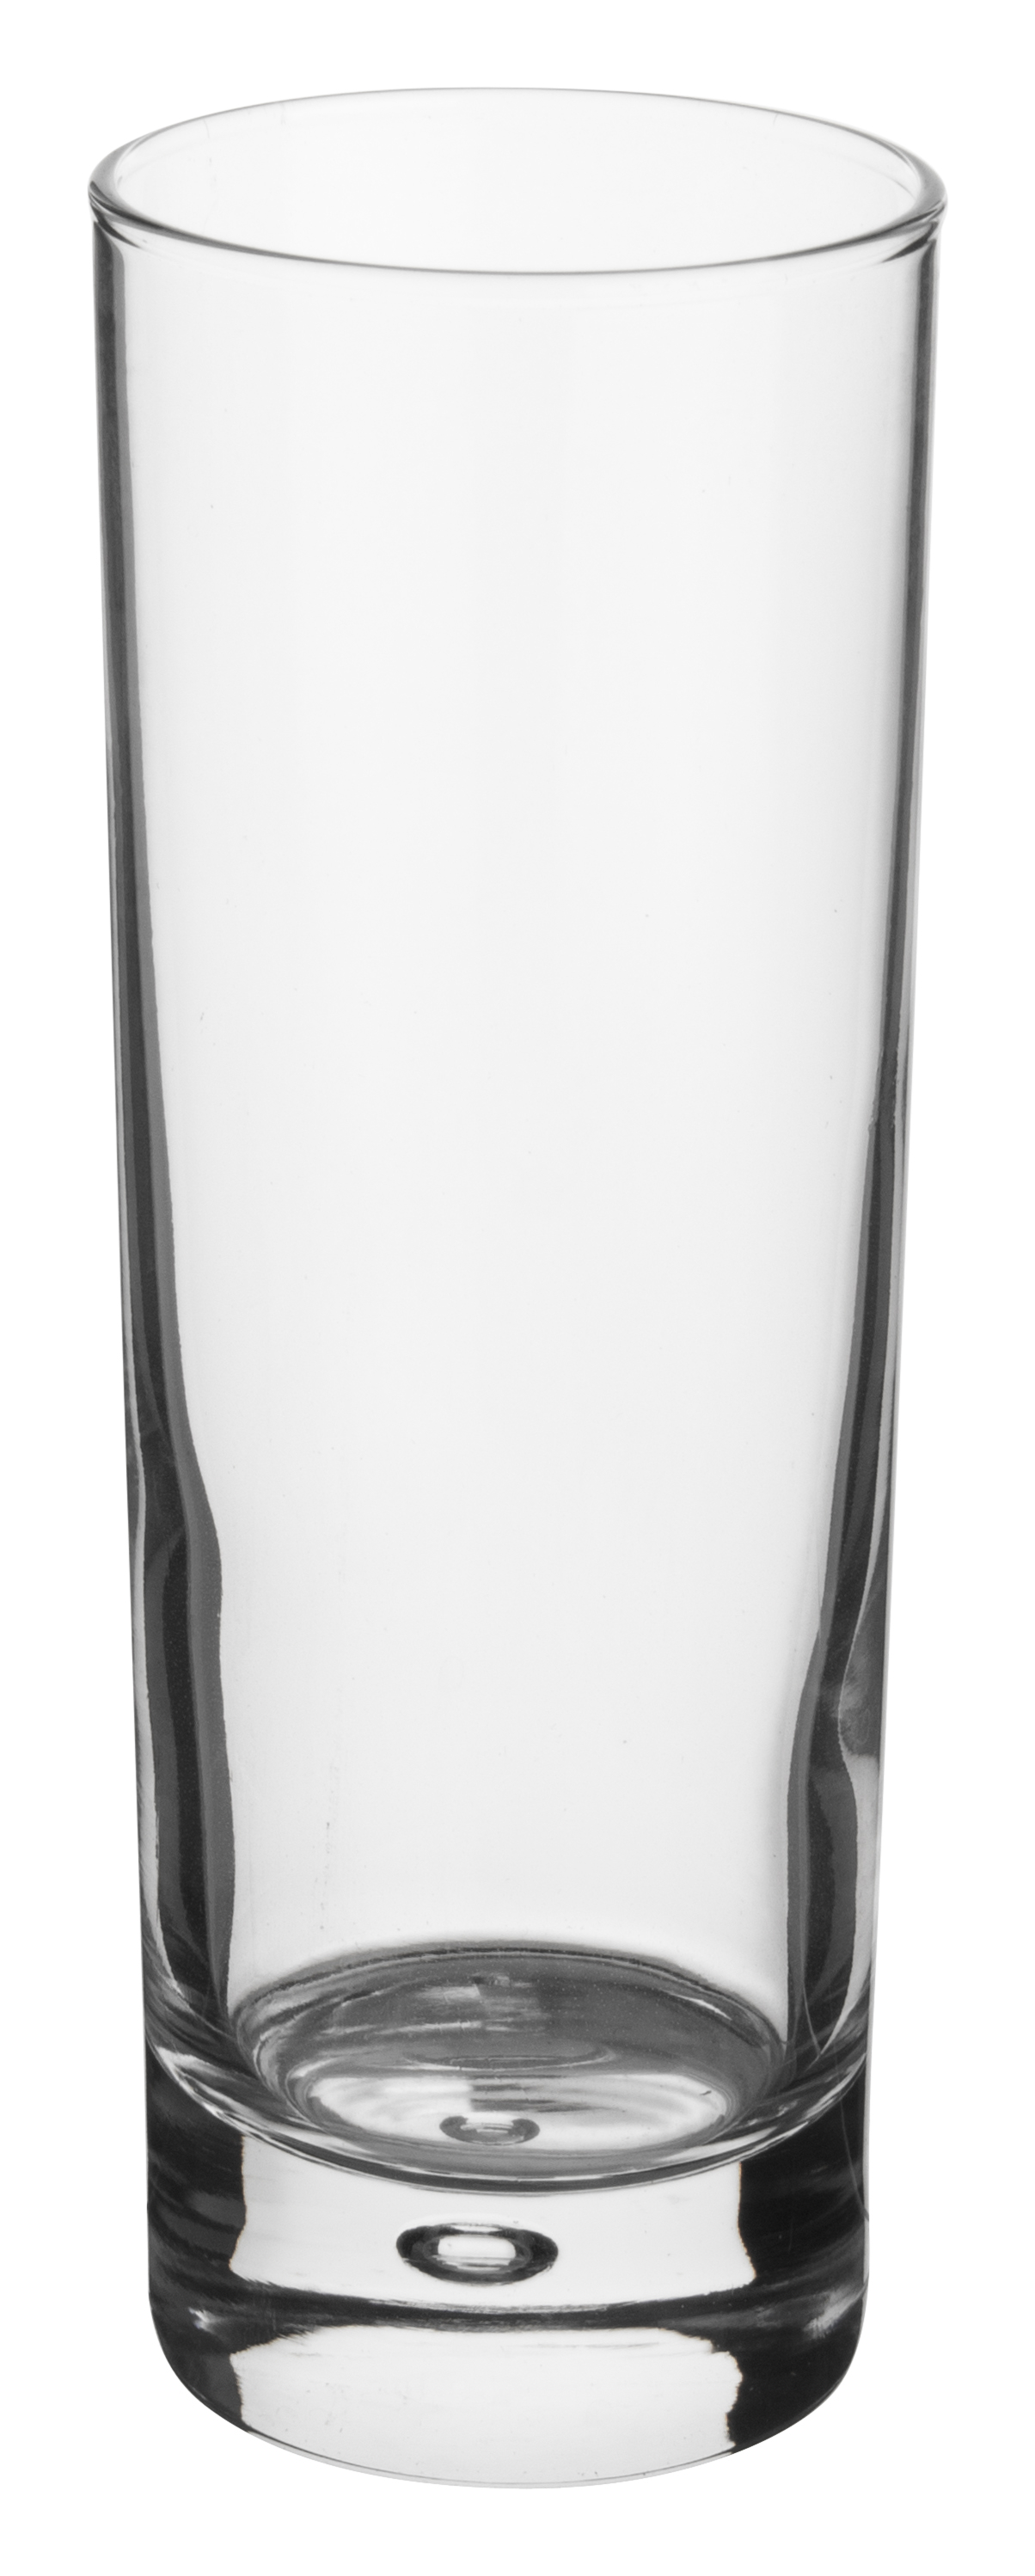 Long drink glass Tall Centra, Pasabahce - 290ml (1 pc.)